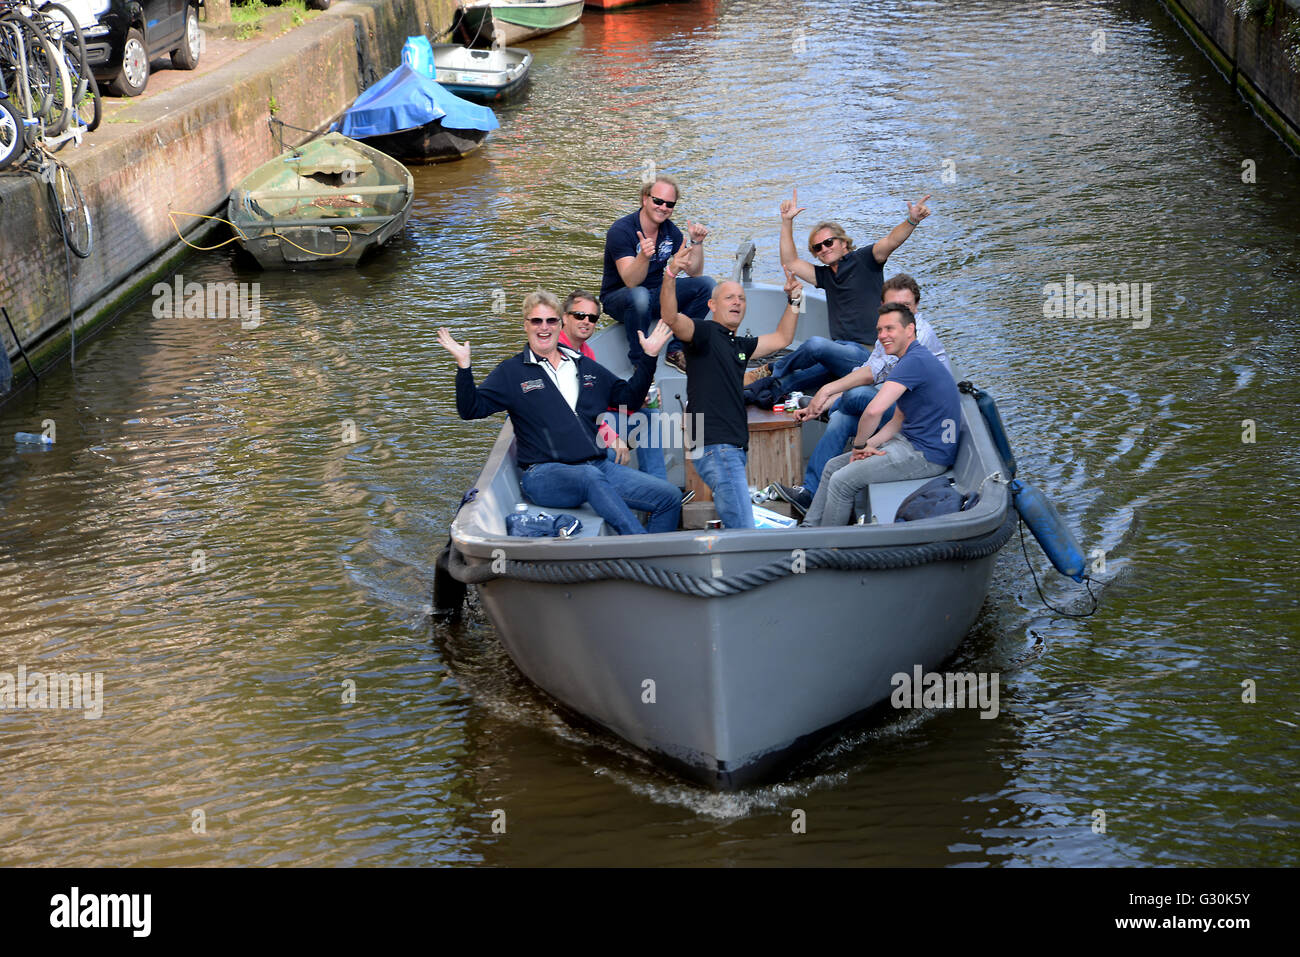 Young adults laughing waving steer small open canal boat look up laugh pose photo. Stock Photo